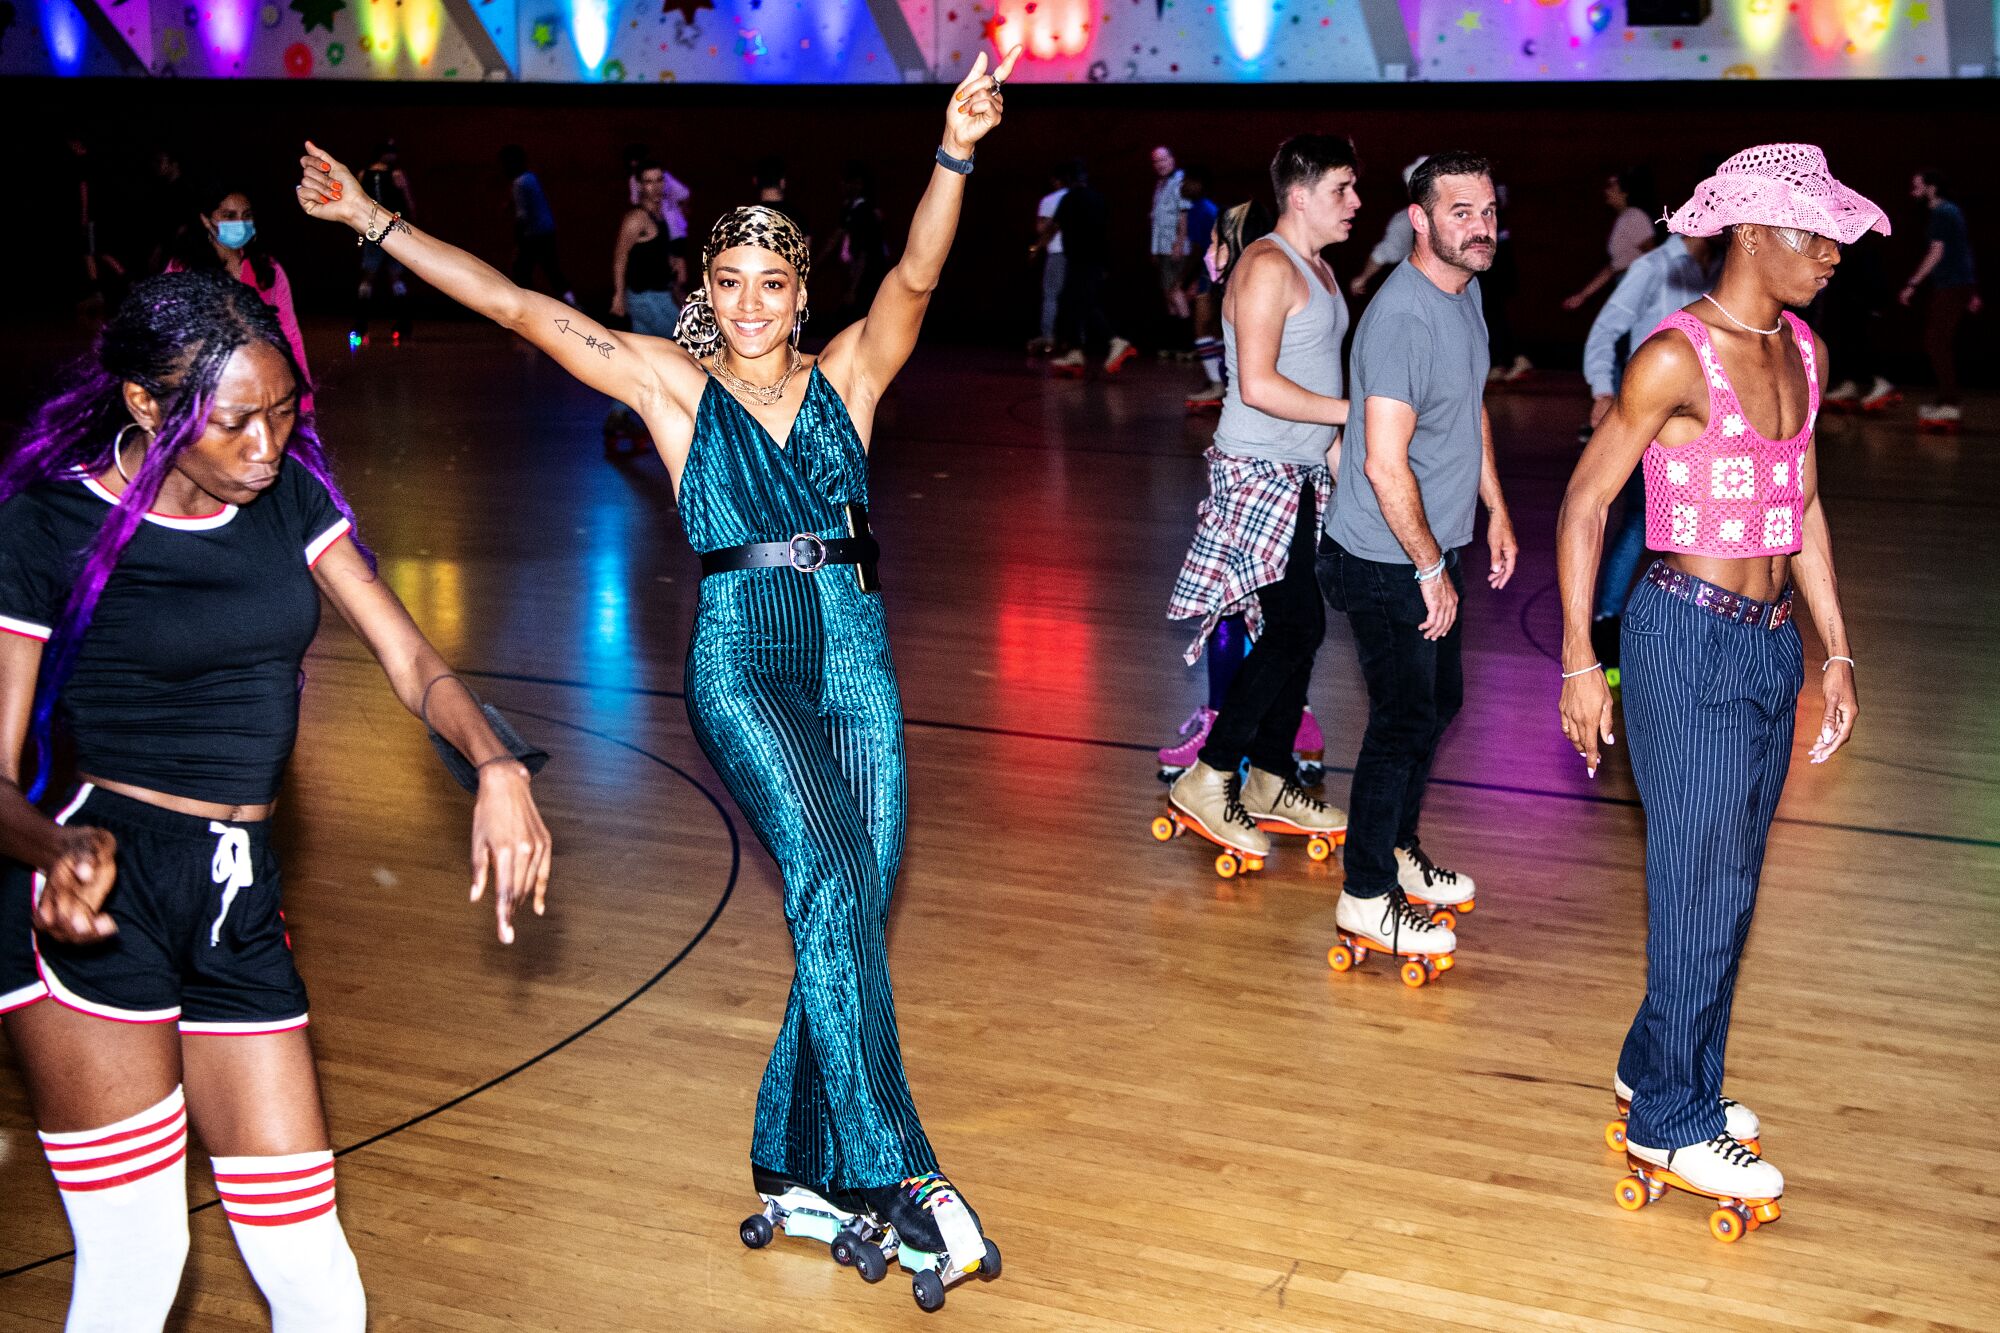 A woman skates with her arms raised in joy.